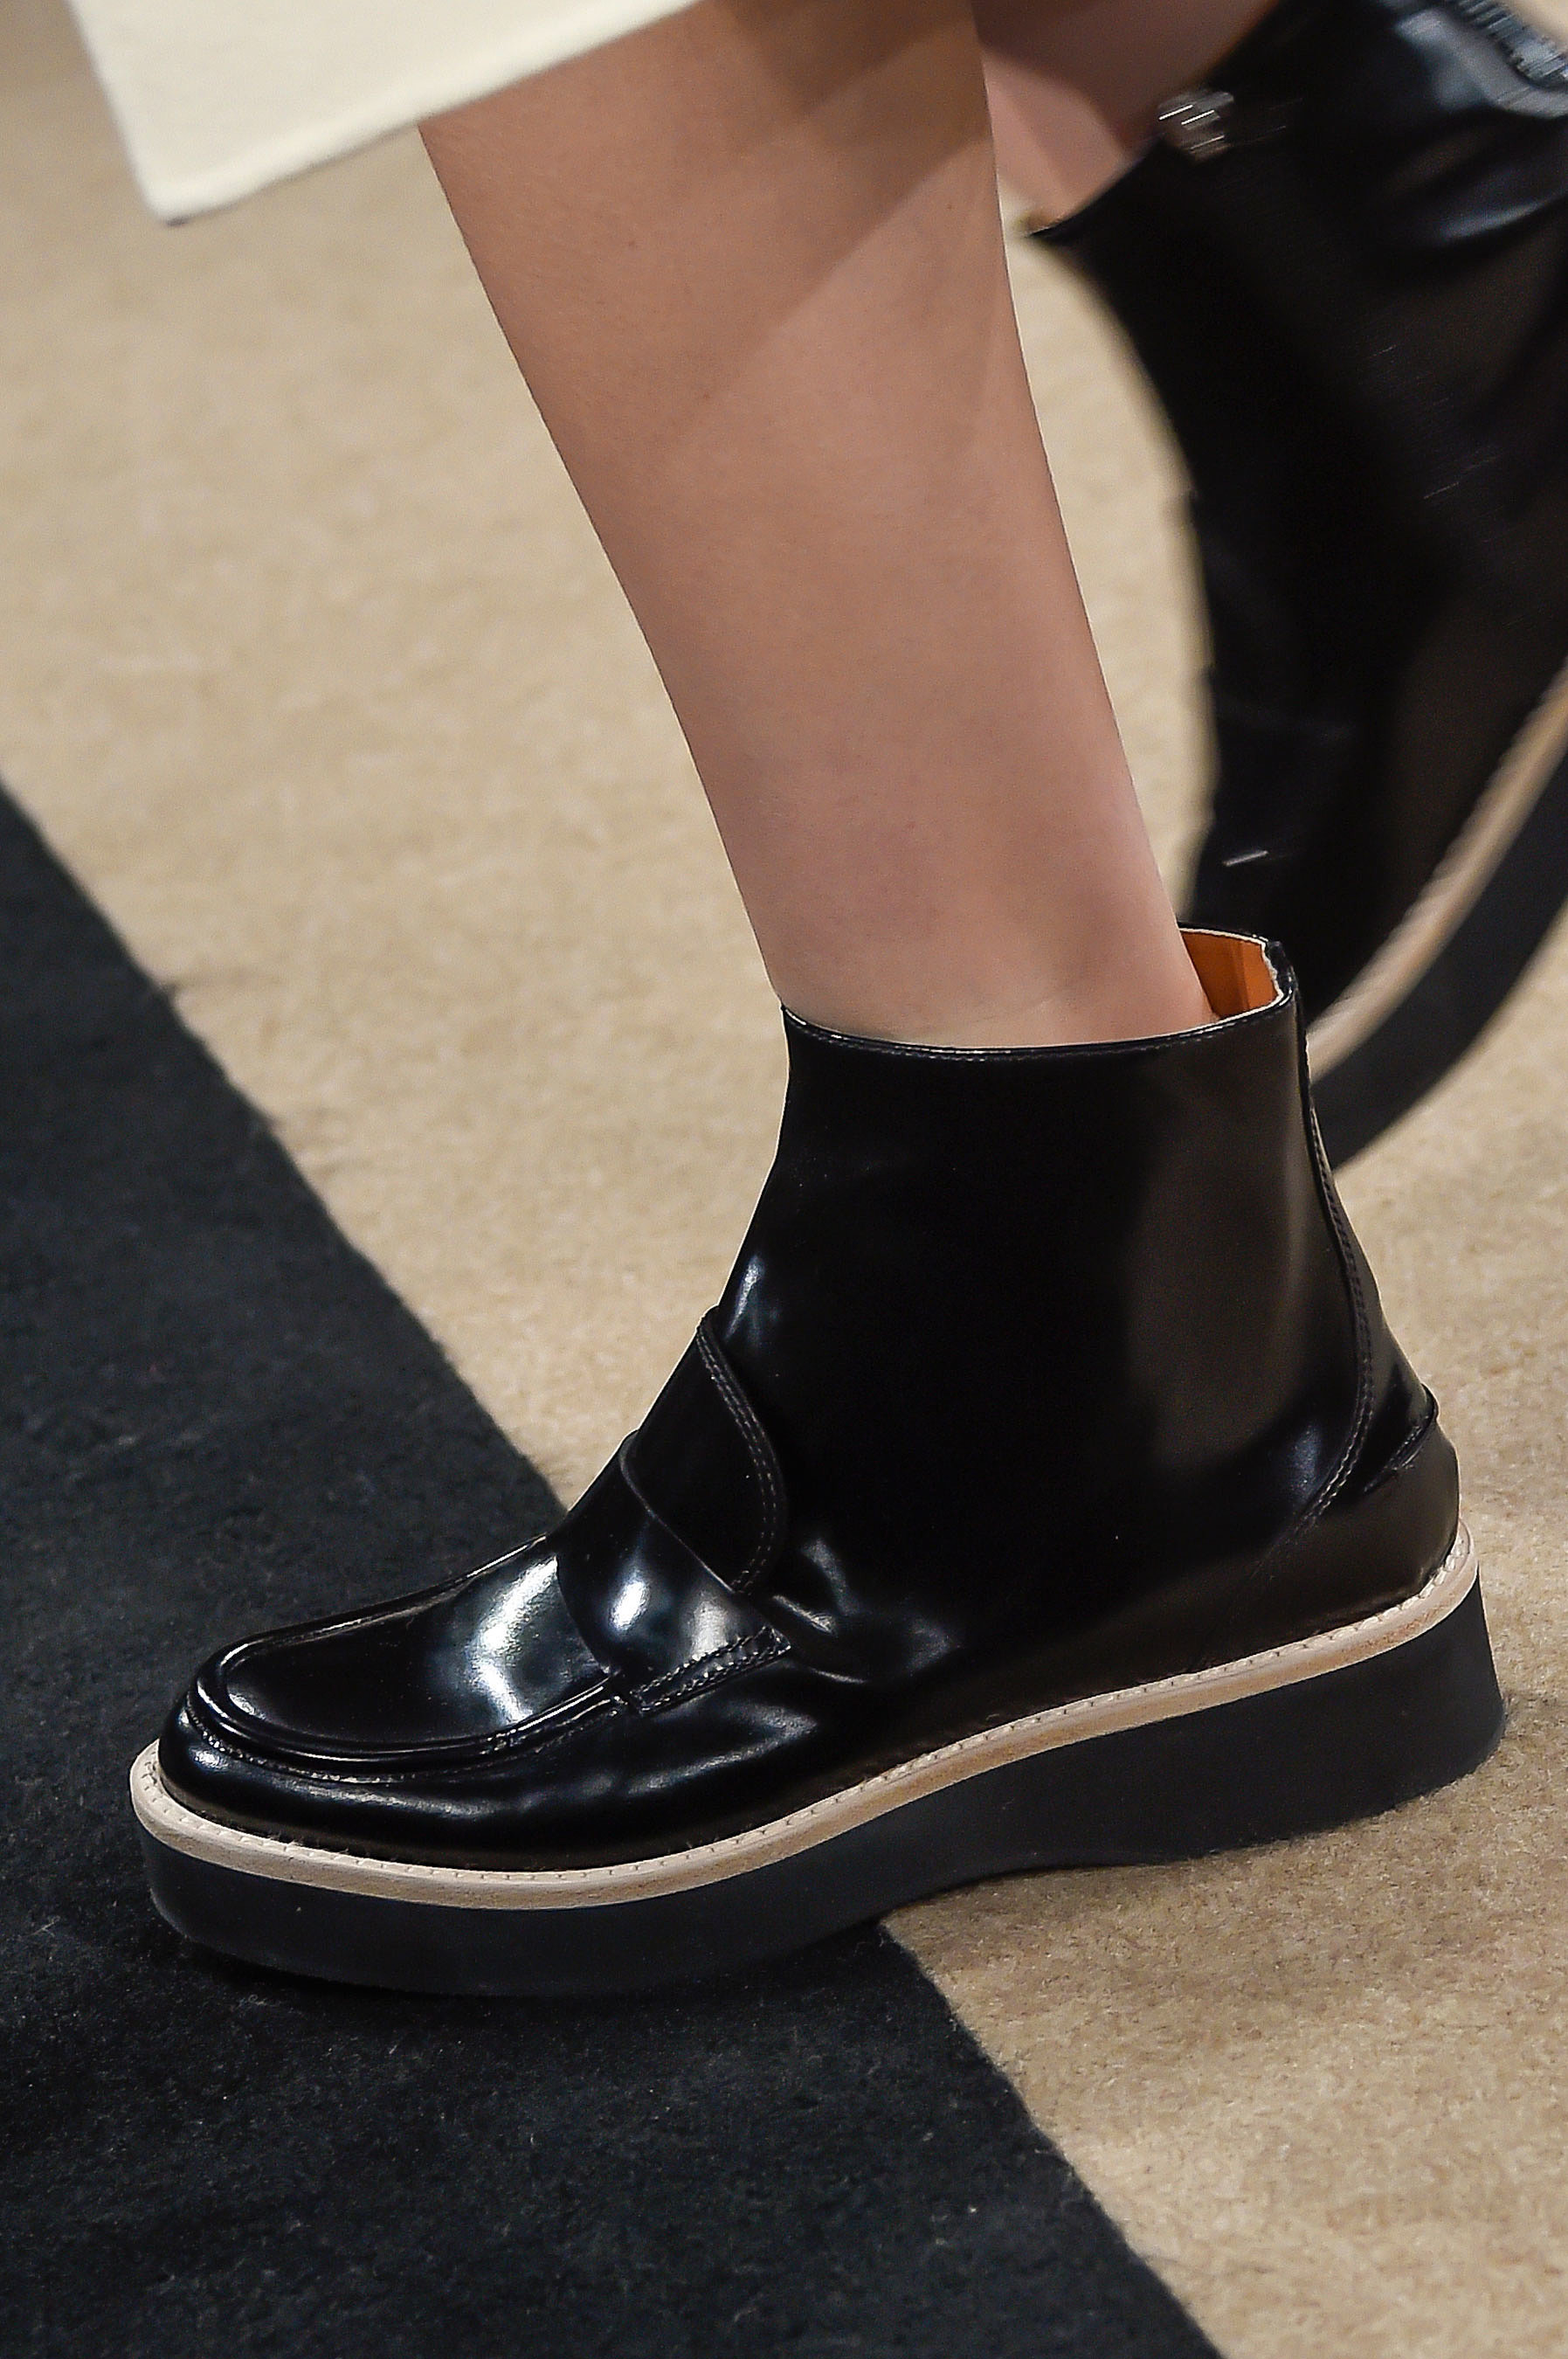 Derek Lam Fall '16 | It's All in the Details: Check Out the Shoes From ...